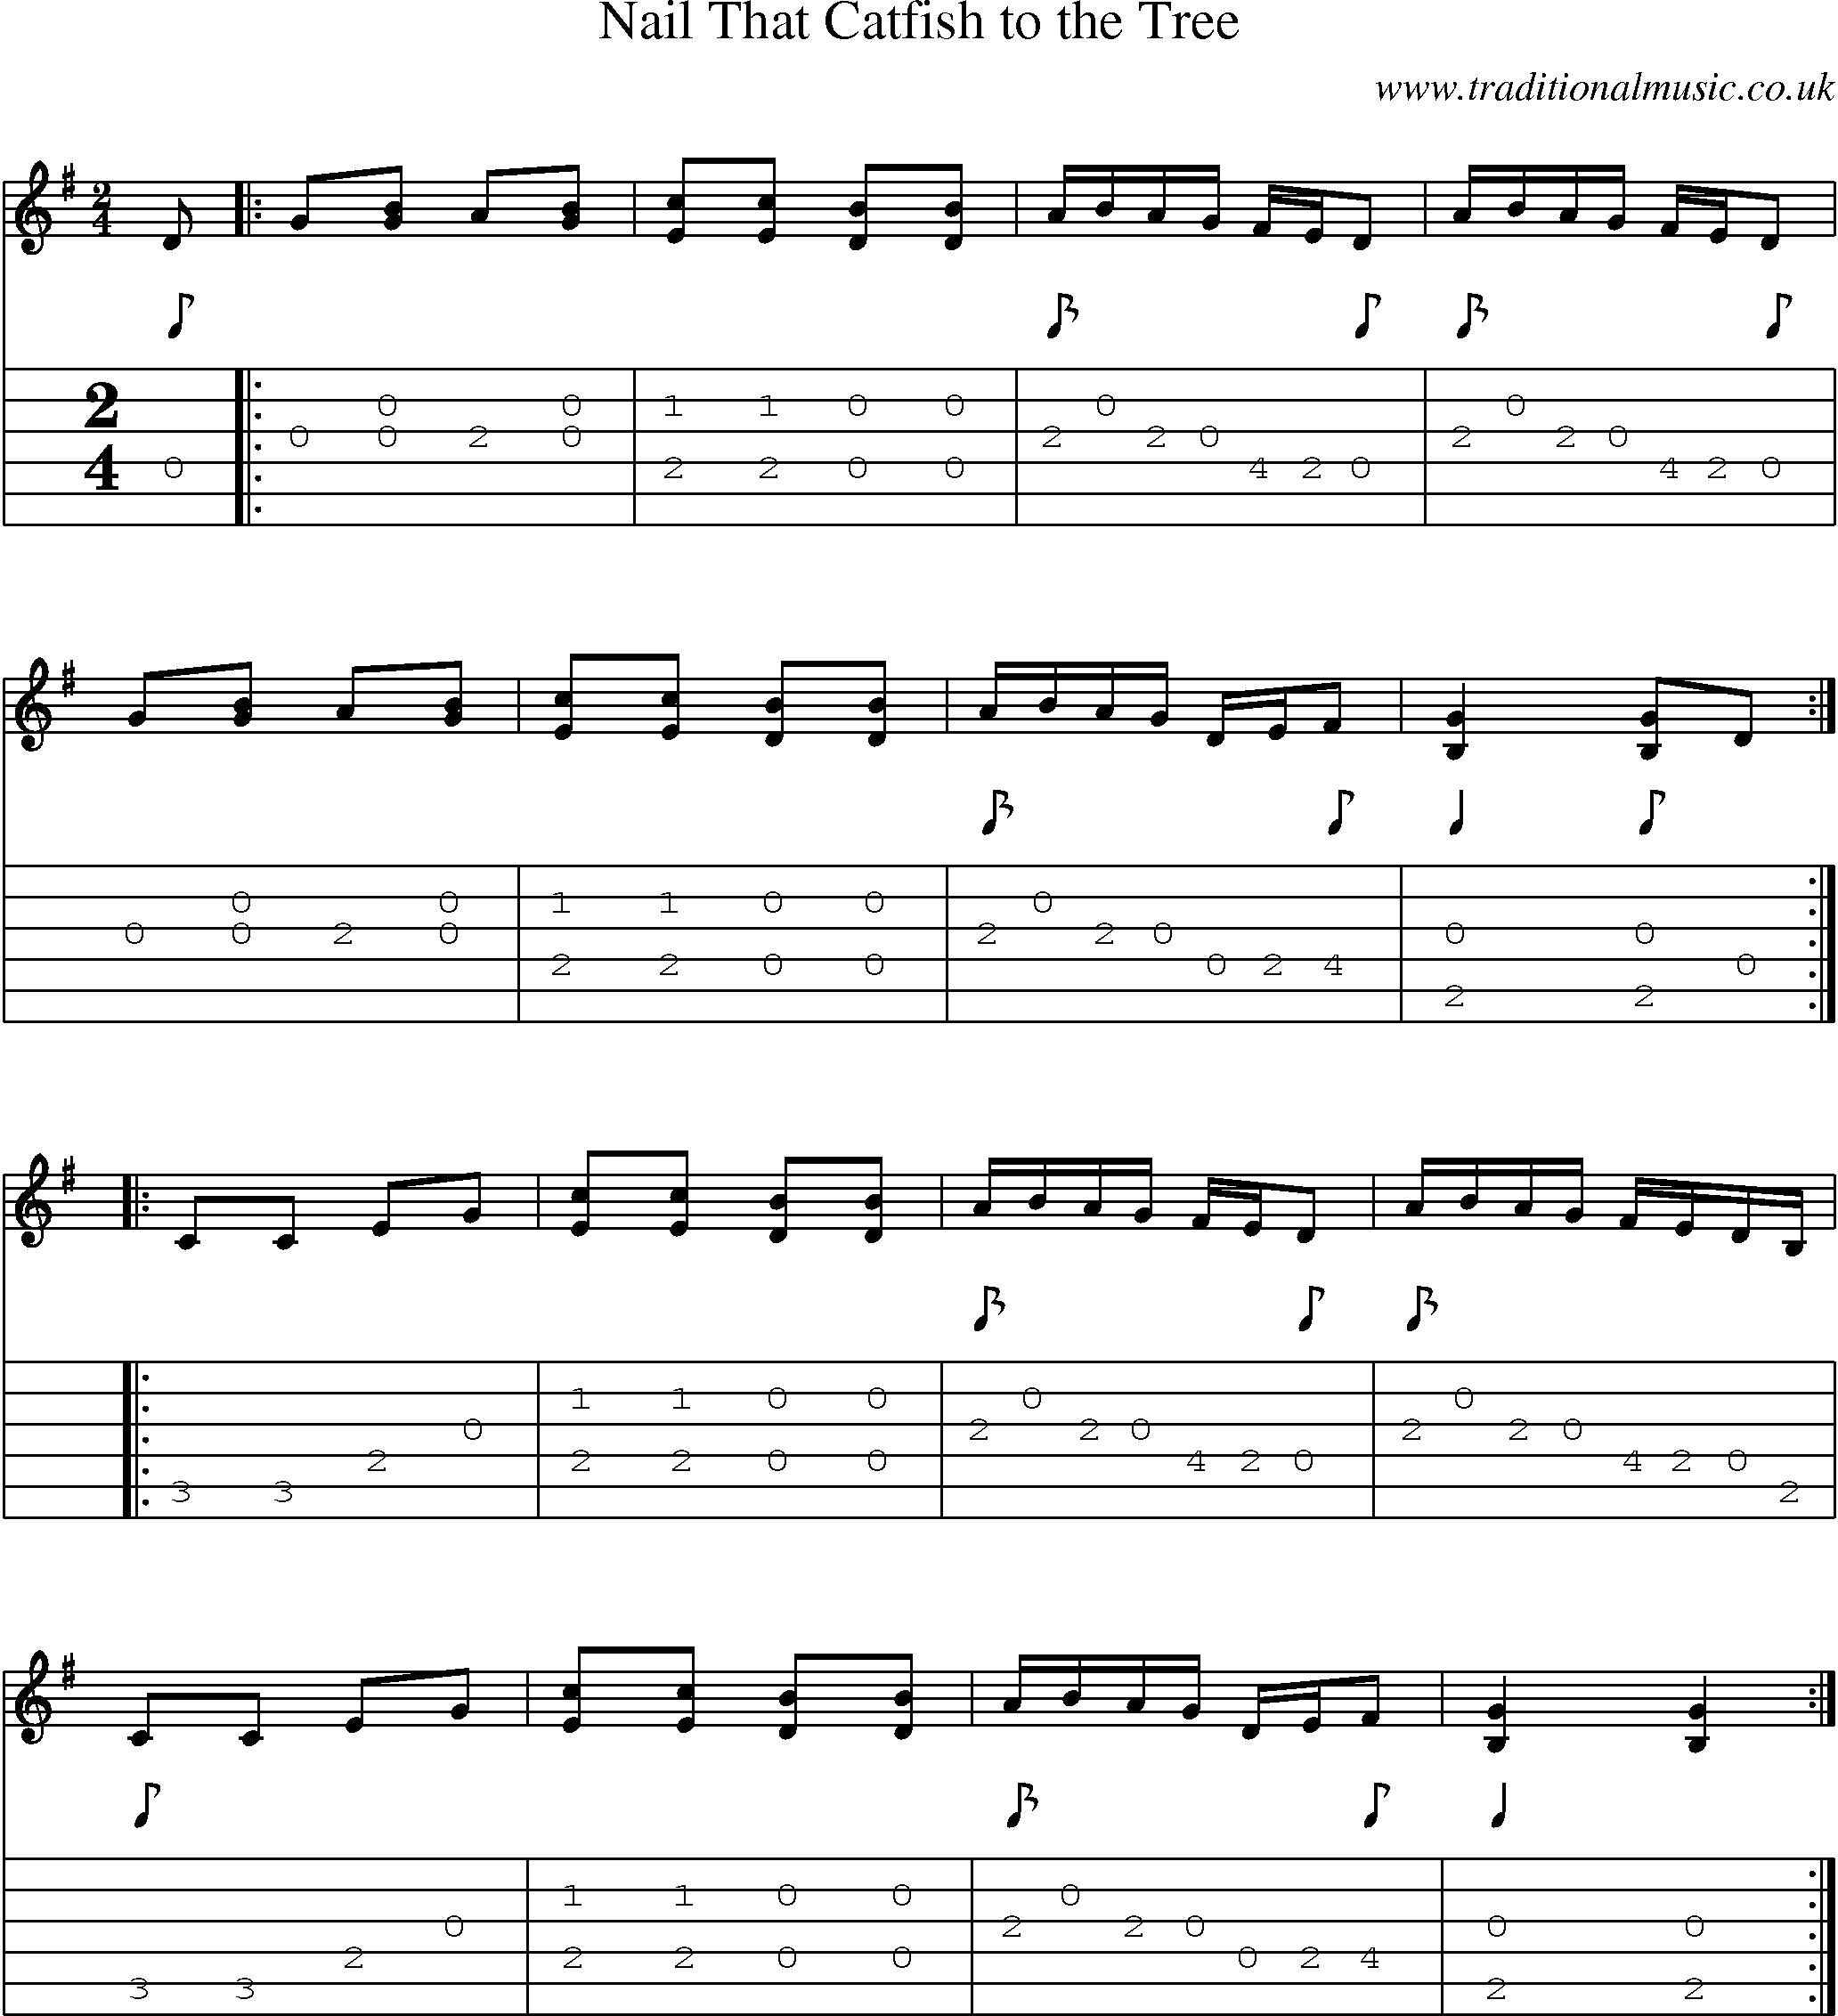 Music Score and Guitar Tabs for Nail That Catfish To Tree